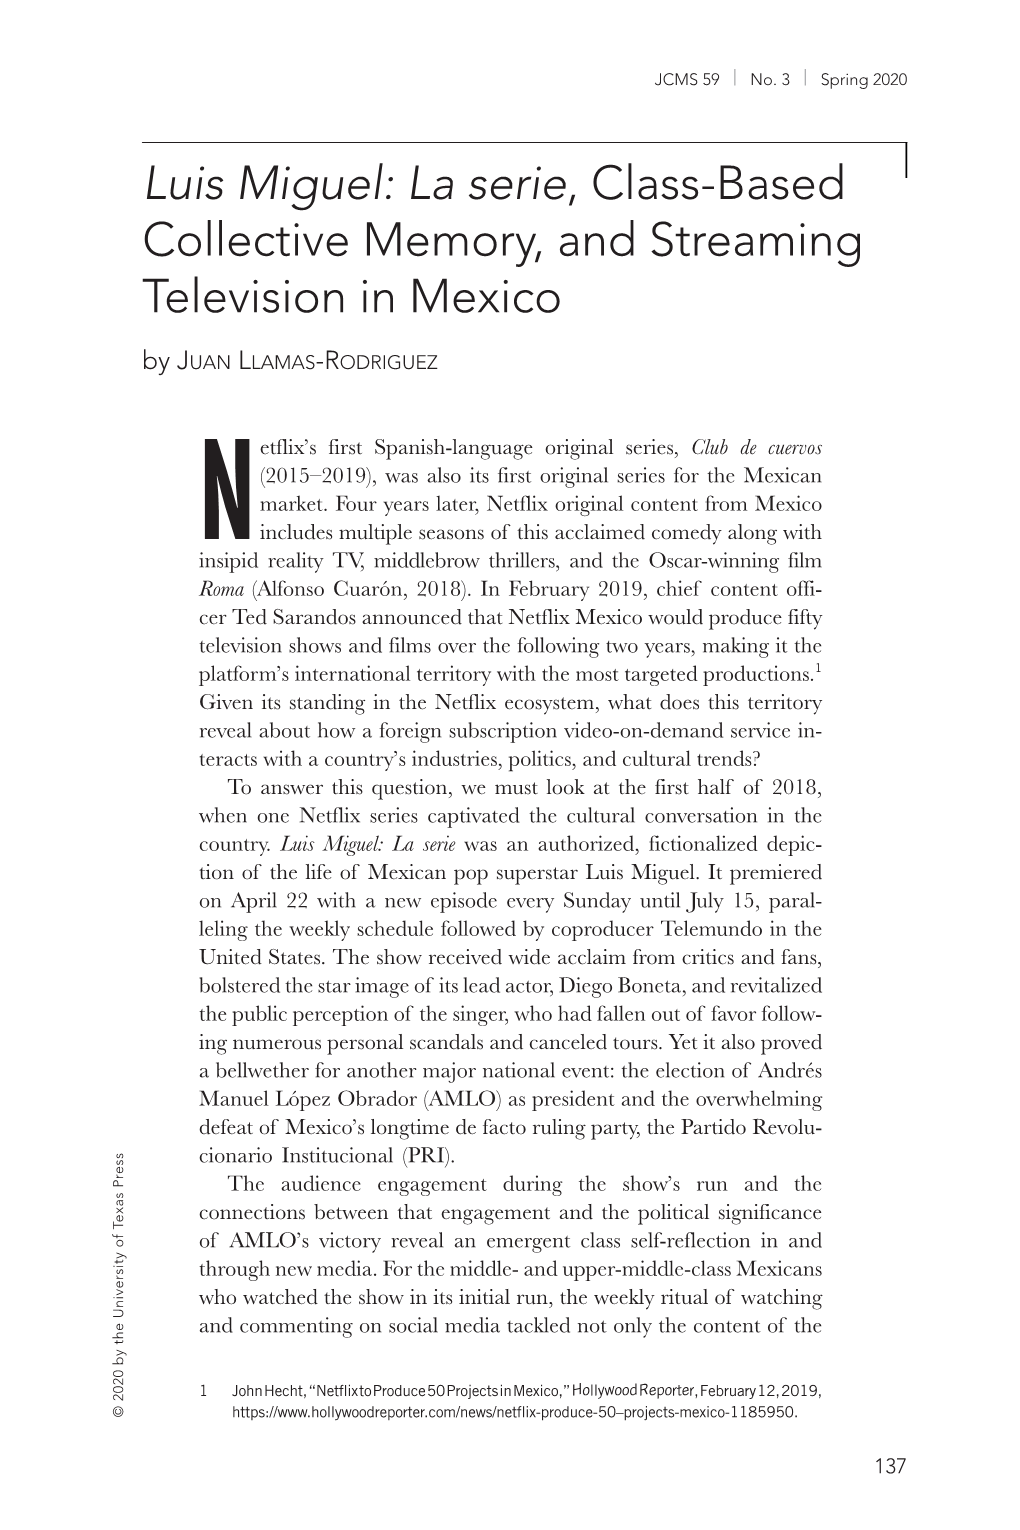 Luis Miguel: La Serie, Class-Based Collective Memory, and Streaming Television in Mexico